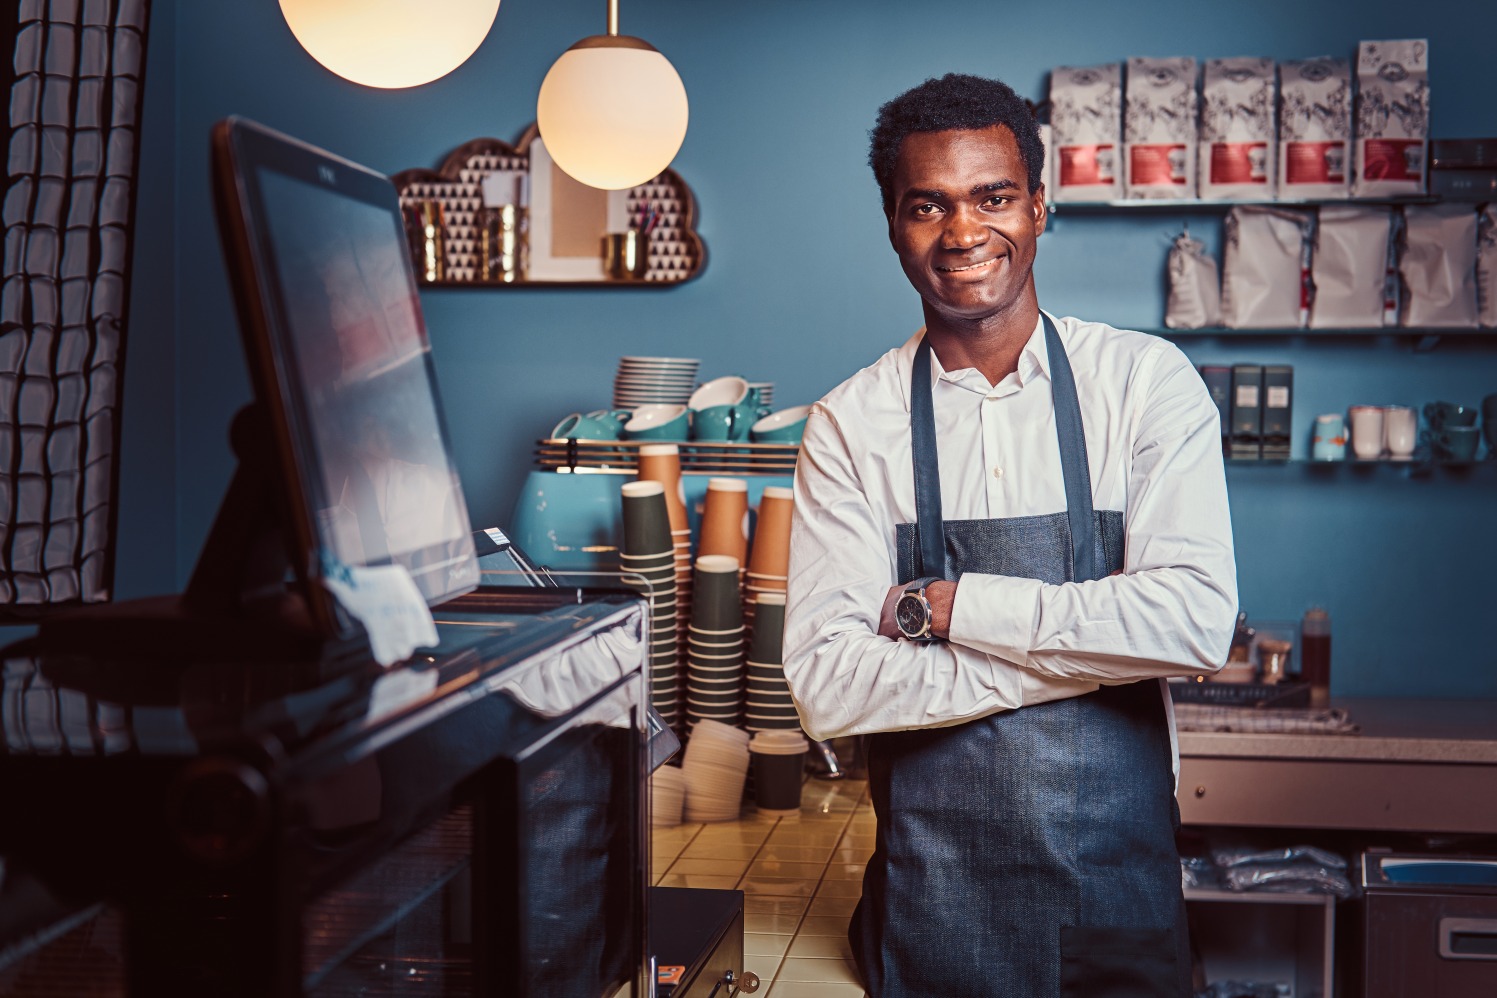 How To Get Funding For Small Business in South Africa